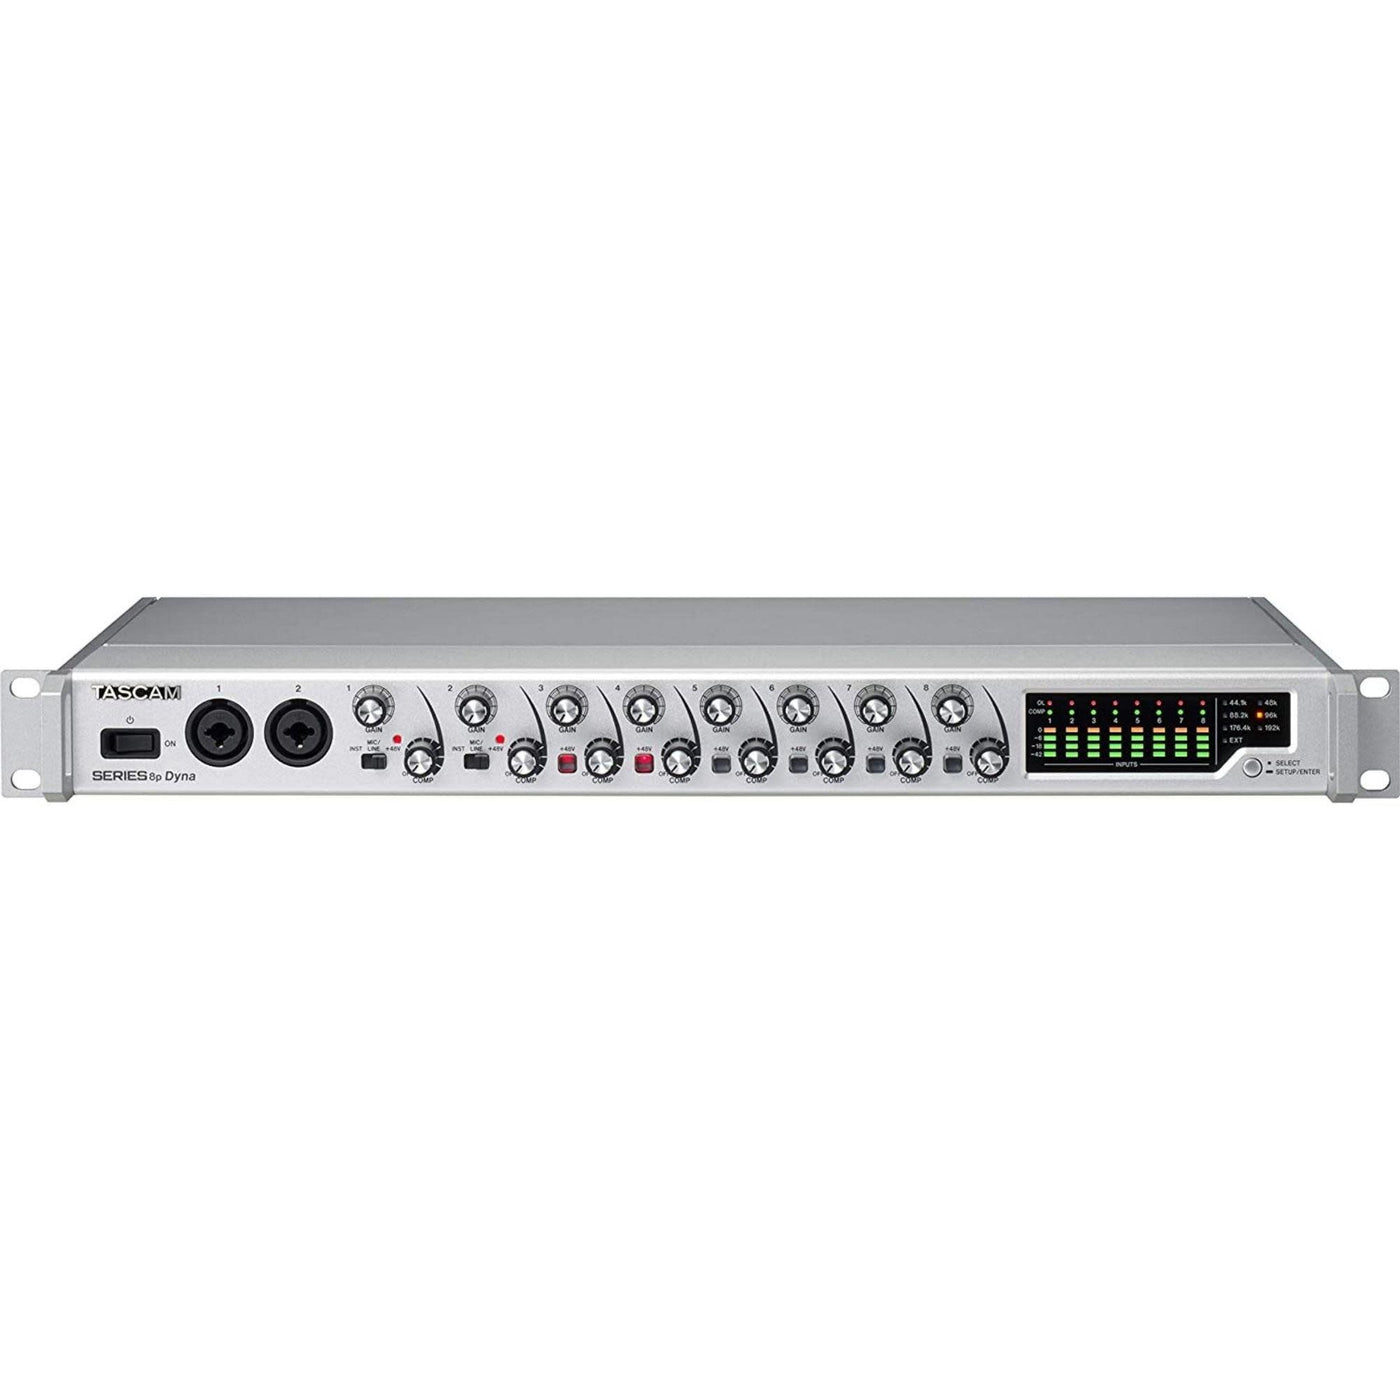 Tascam SERIES 8p Dyna 8-Channel Microphone Preamp & Compressor